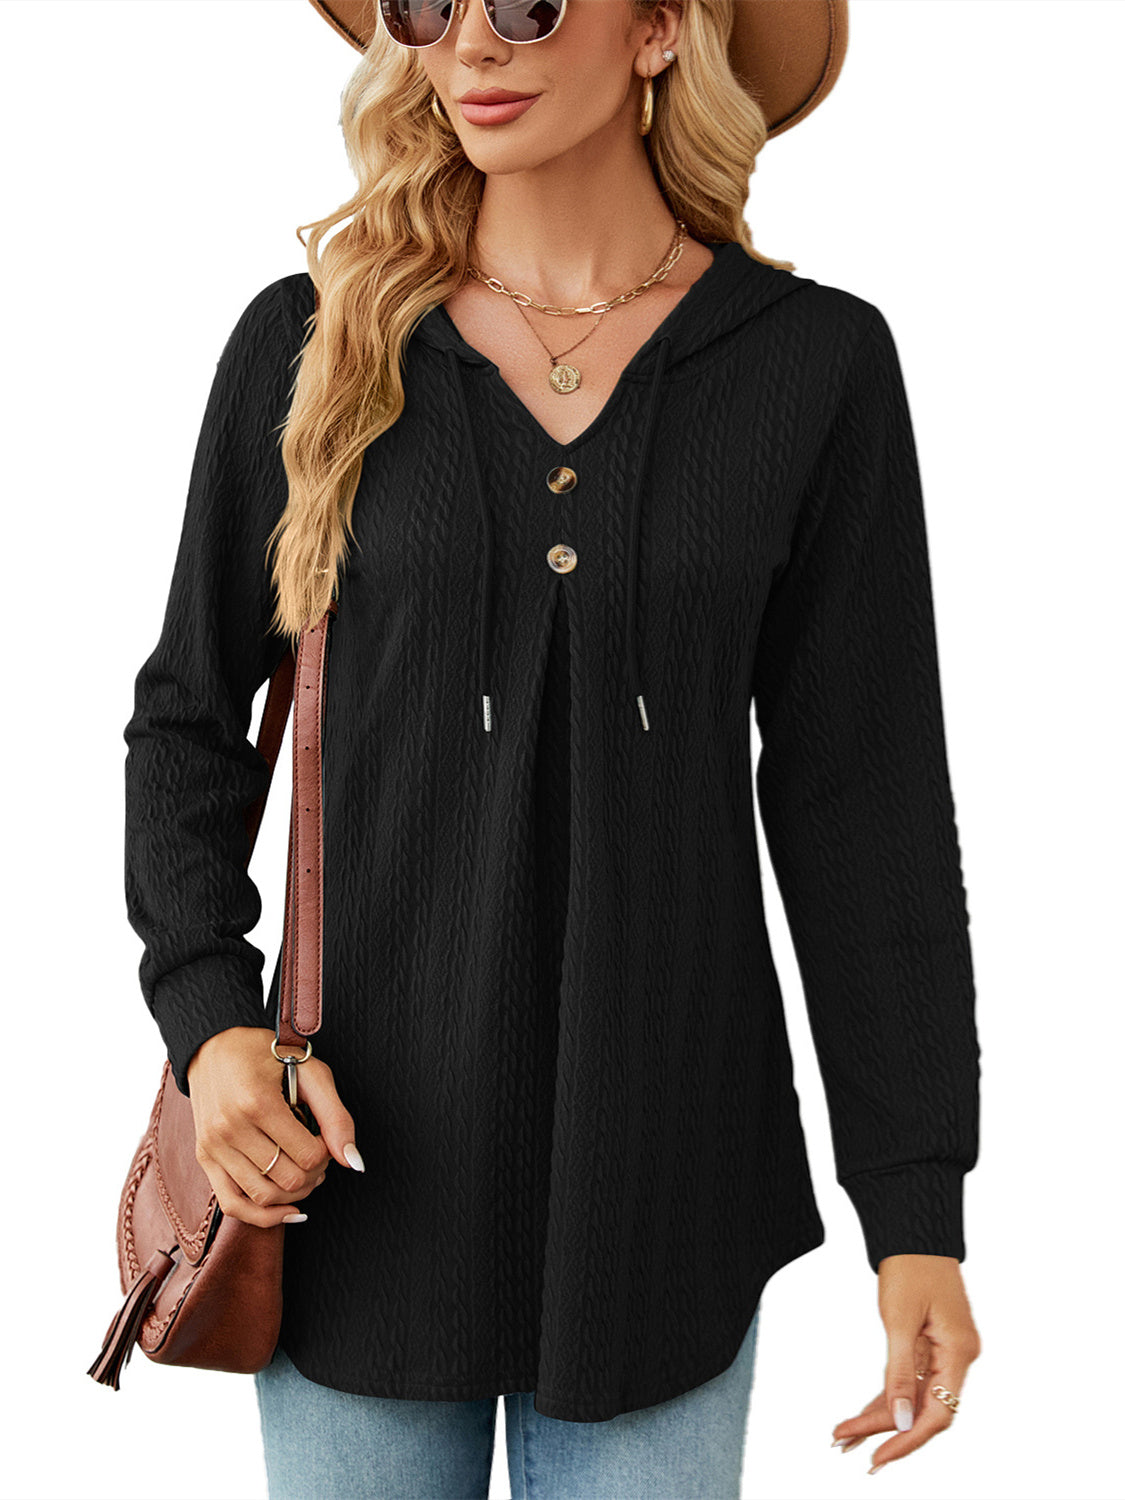 Women's Hollow Button Solid Color V-Neck Long Sleeve Top